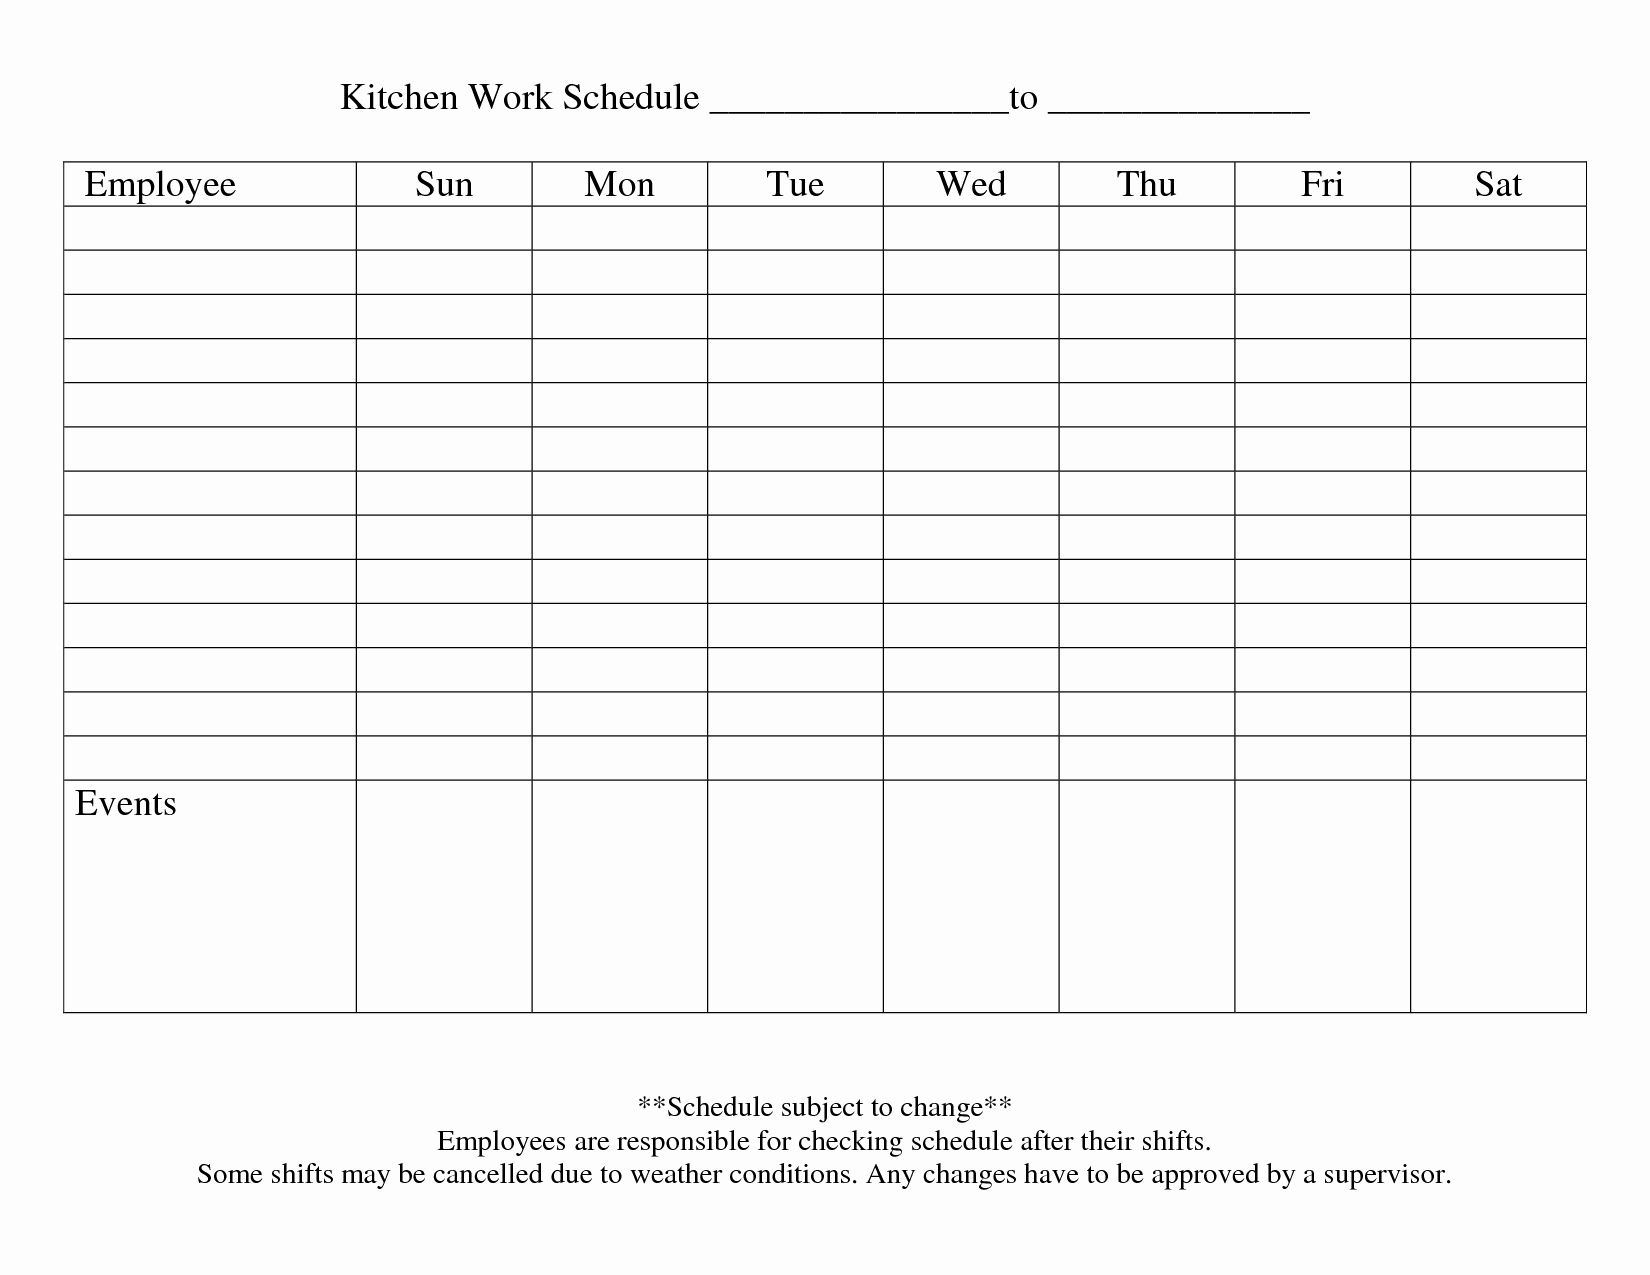 Weekly Staffing Schedule Template Inspirational Blank Weekly Employee Schedule Template to Pin On